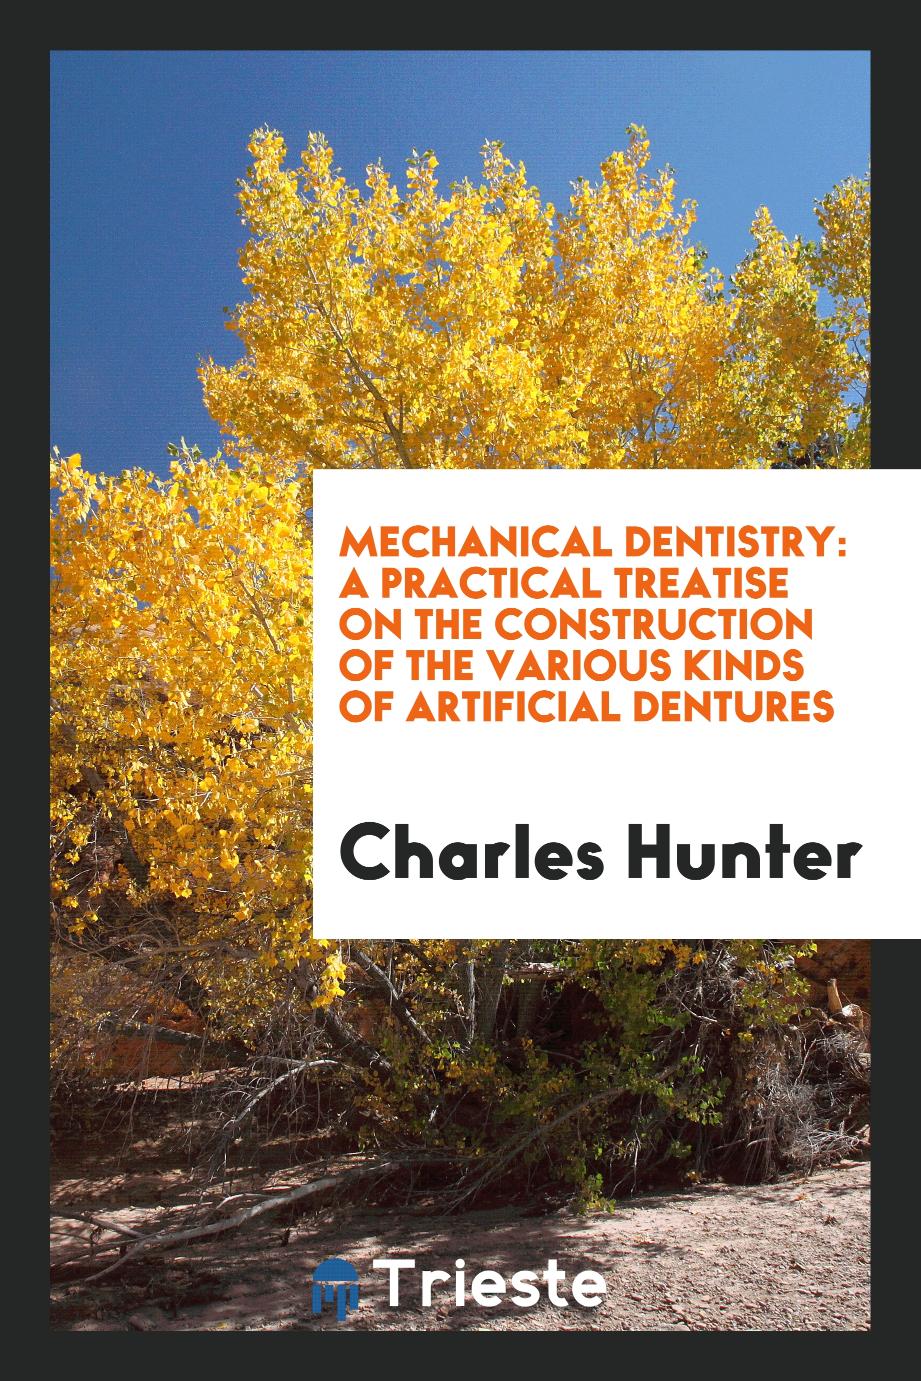 Mechanical Dentistry: A Practical Treatise on the Construction of the Various Kinds of Artificial Dentures